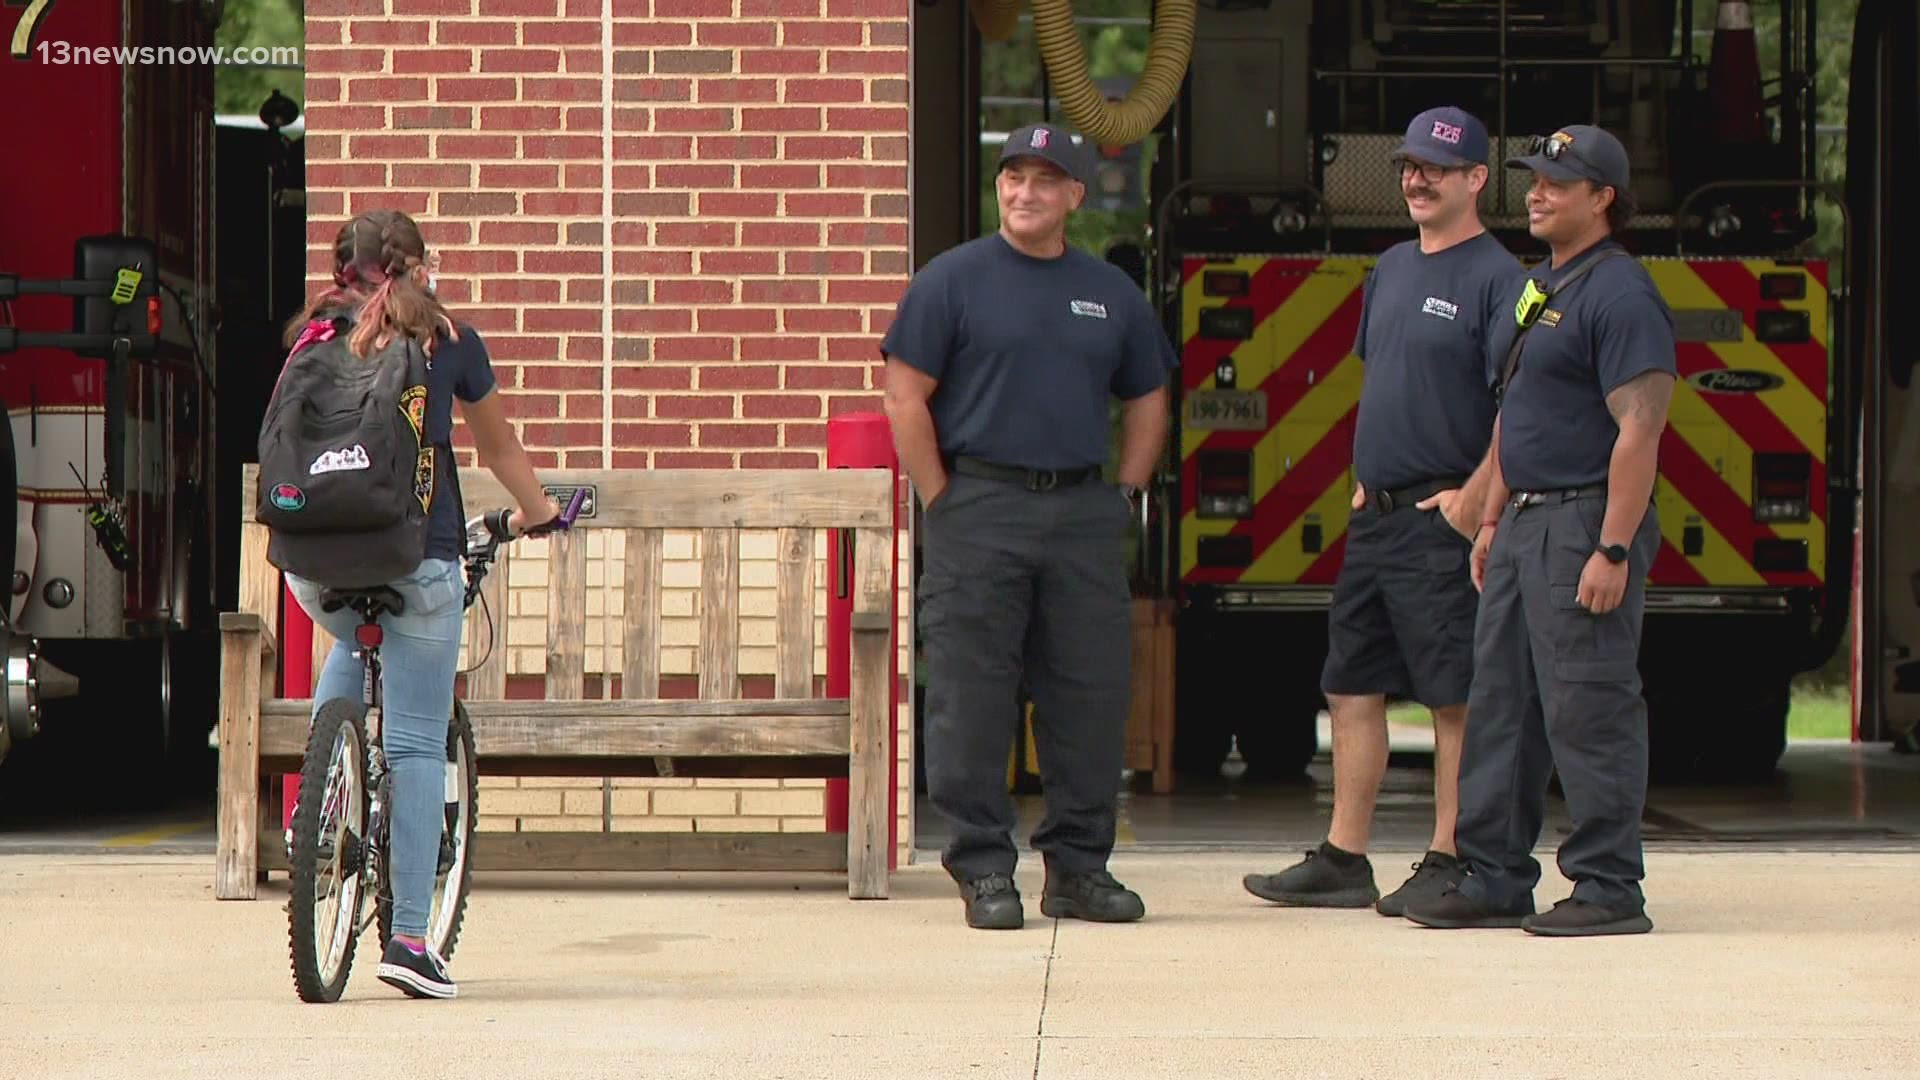 A heartwarming story out of Suffolk: Ally Campbell rides her bike to Fire Station 5 to boost the spirits of the firefighters every day.